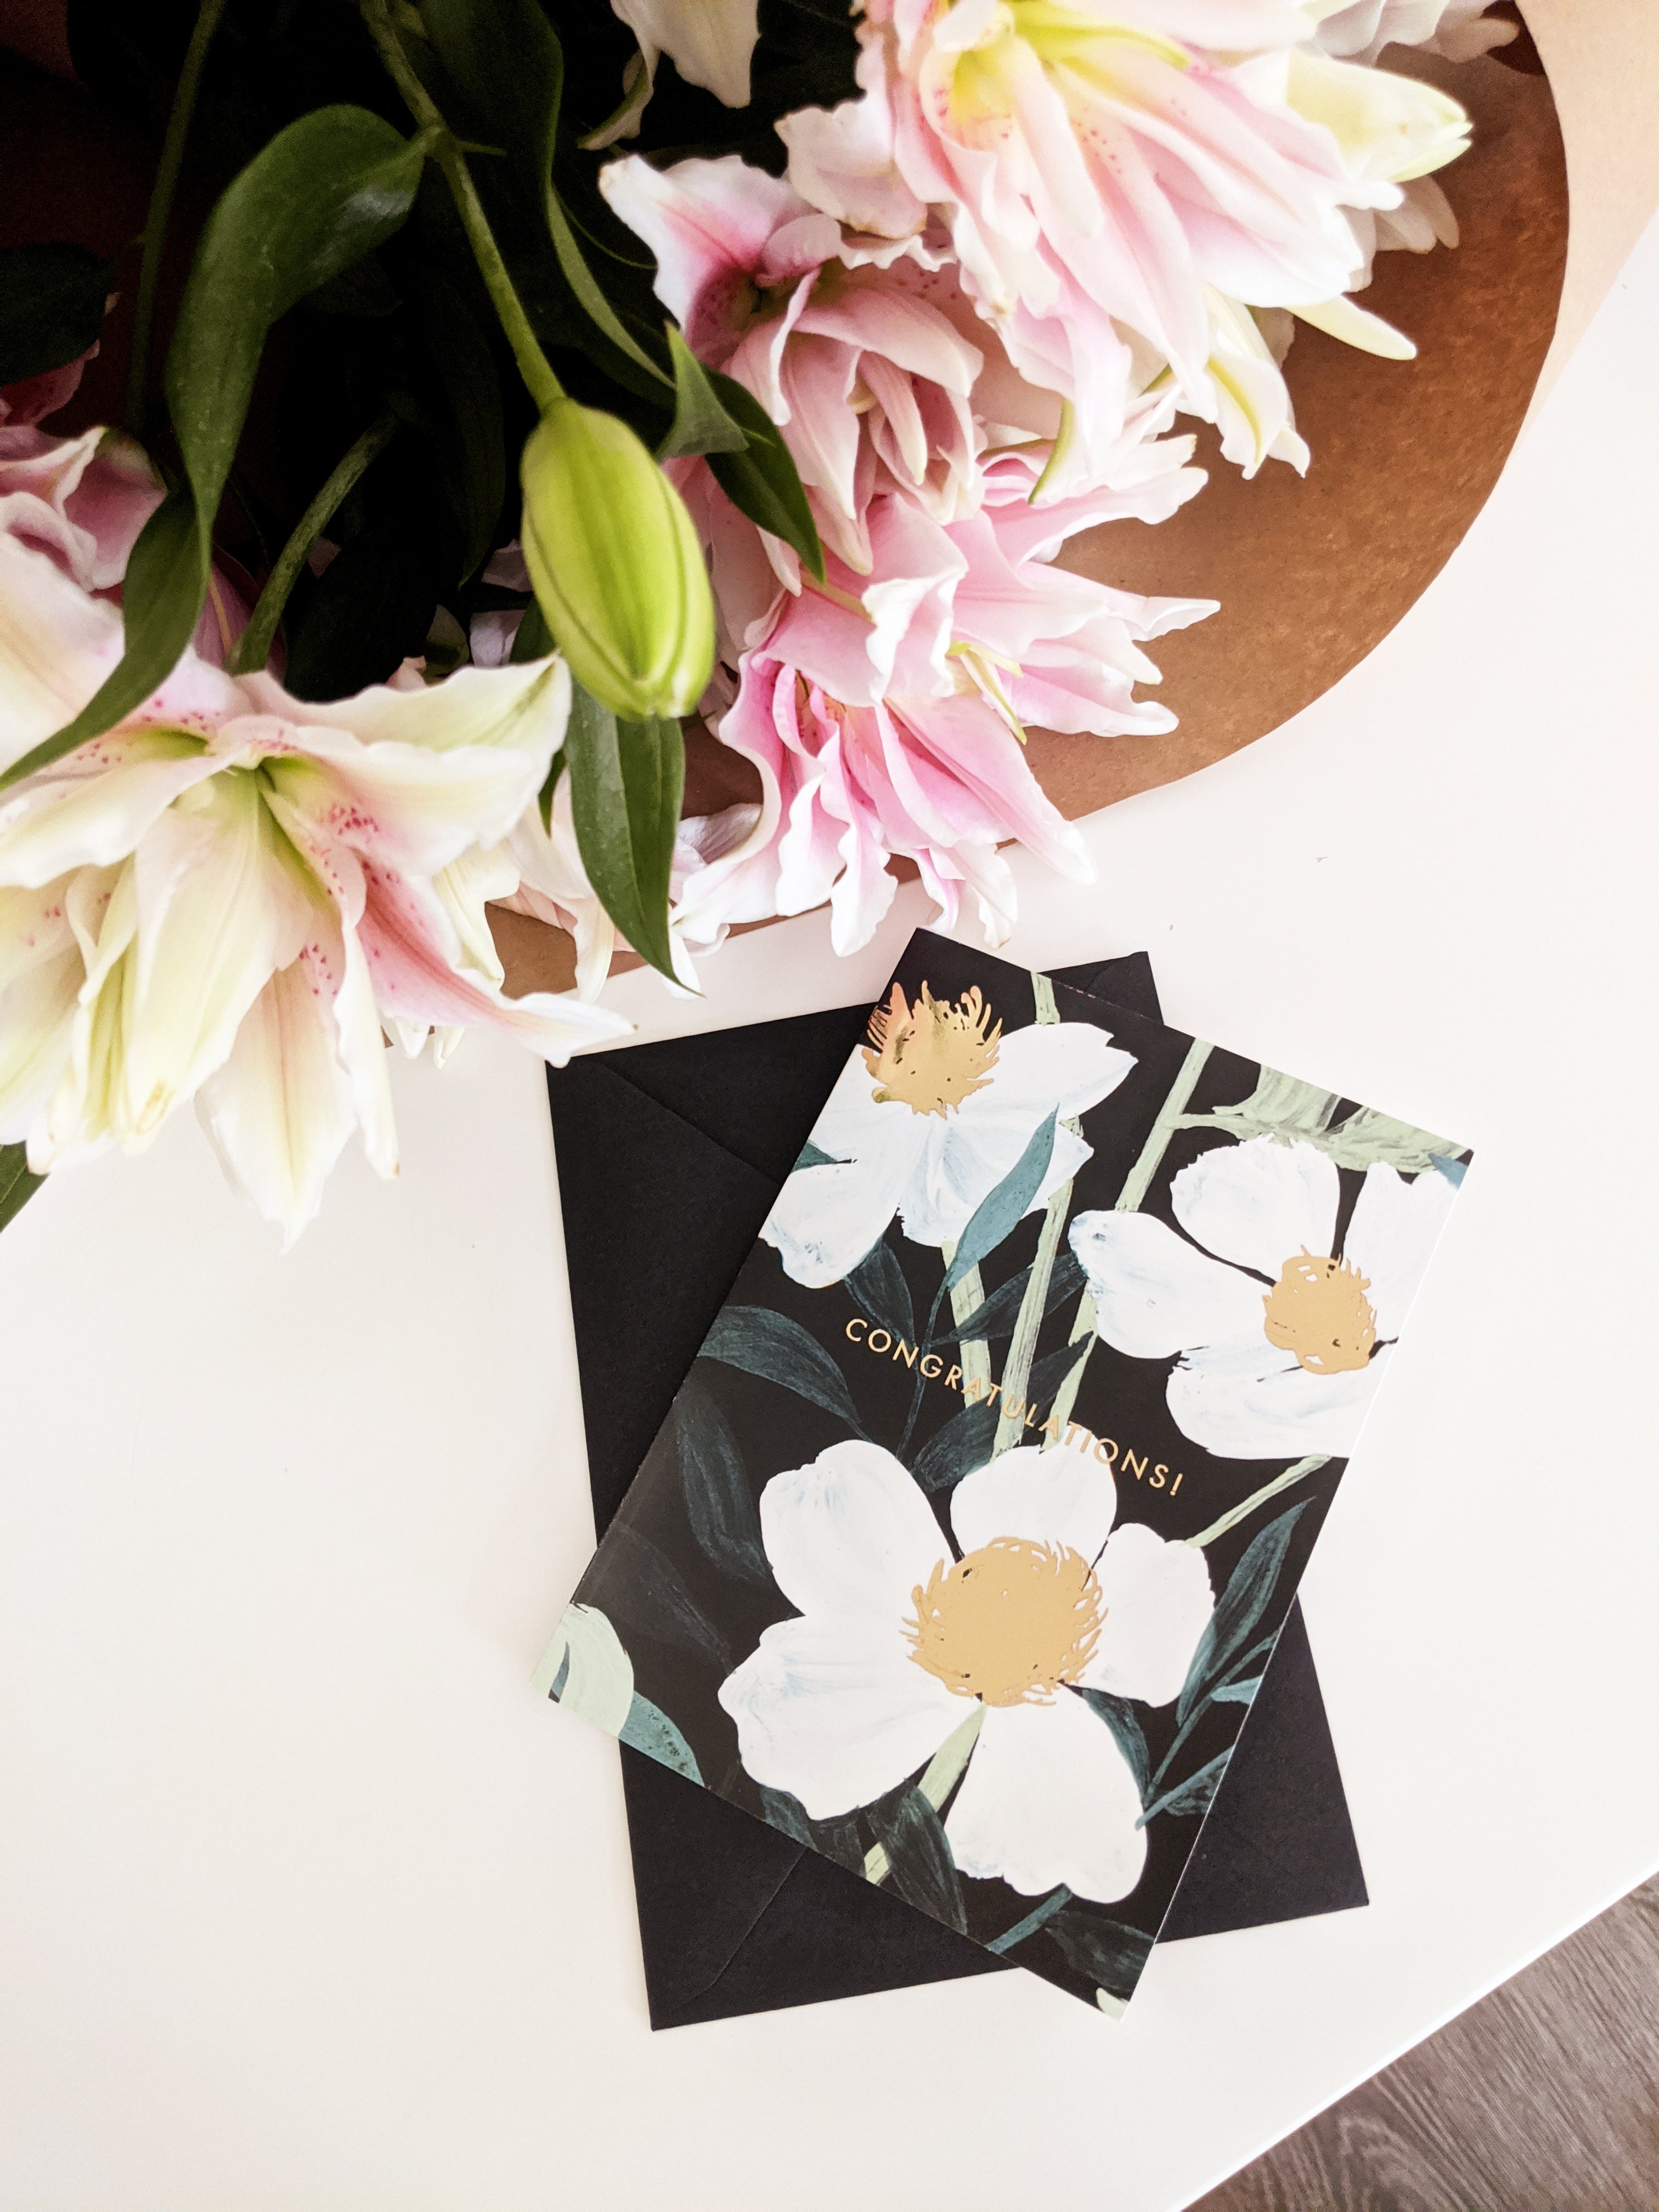 An elegant, black floral Congratulations card sits on a table alongside a bunch of gorgeous pink lilies